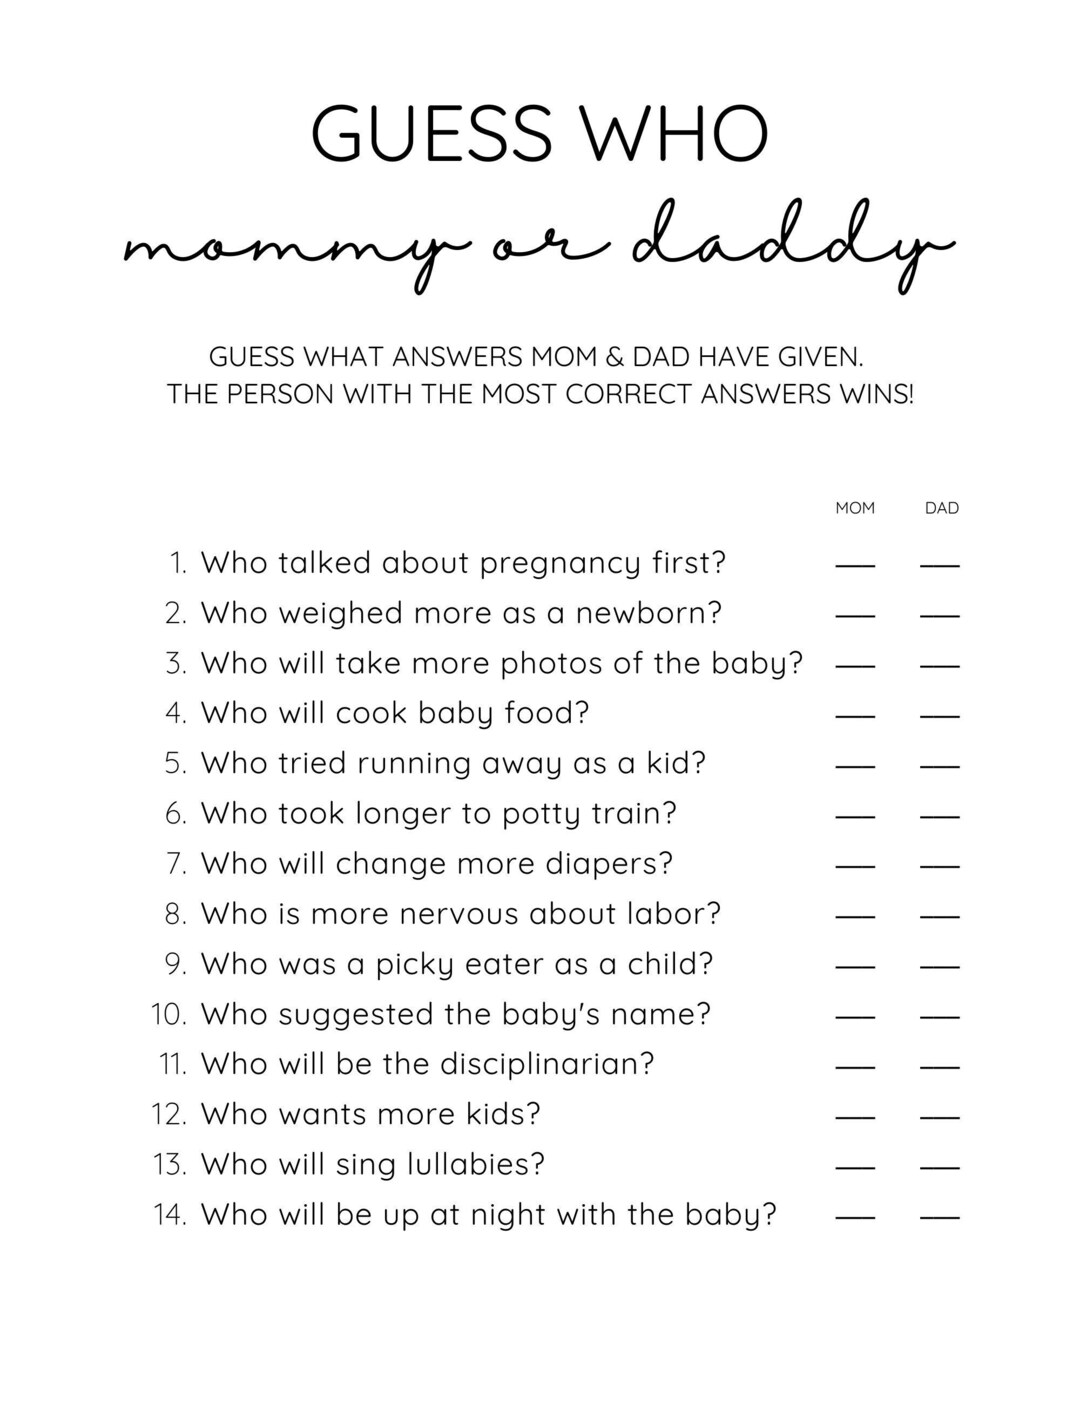 Guess Who Mommy & Daddy Edition Digital Download - Etsy